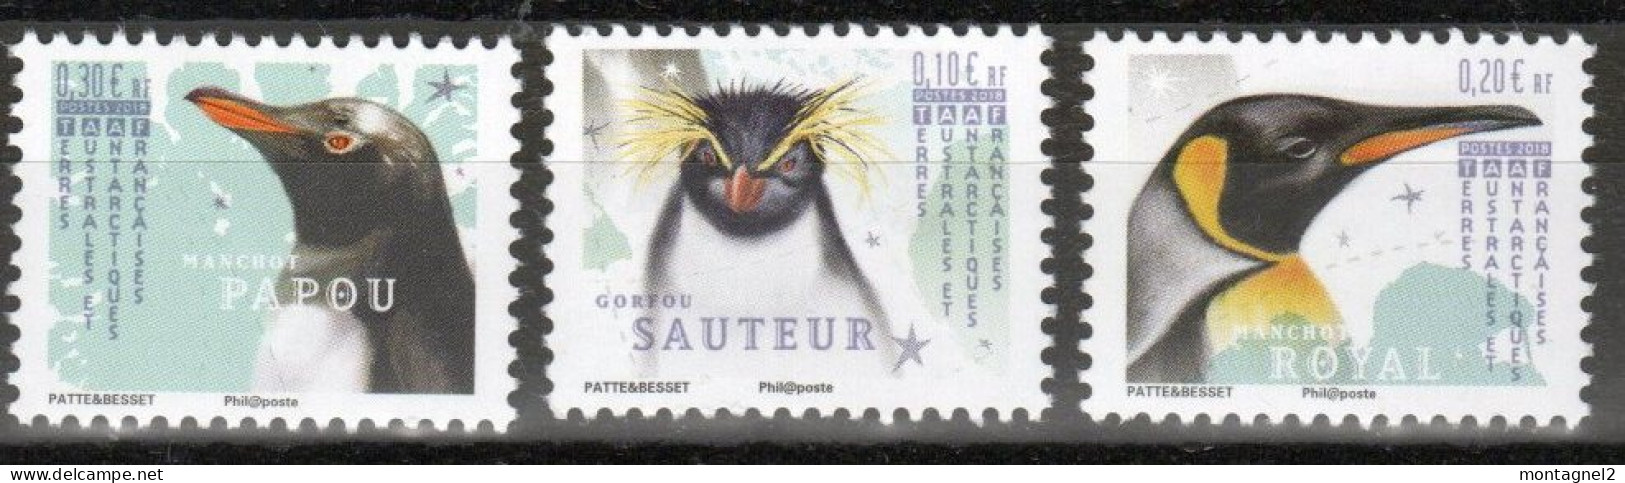 Timbre Des TAAF  N° 871 872 873 Neuf ** - Penguins